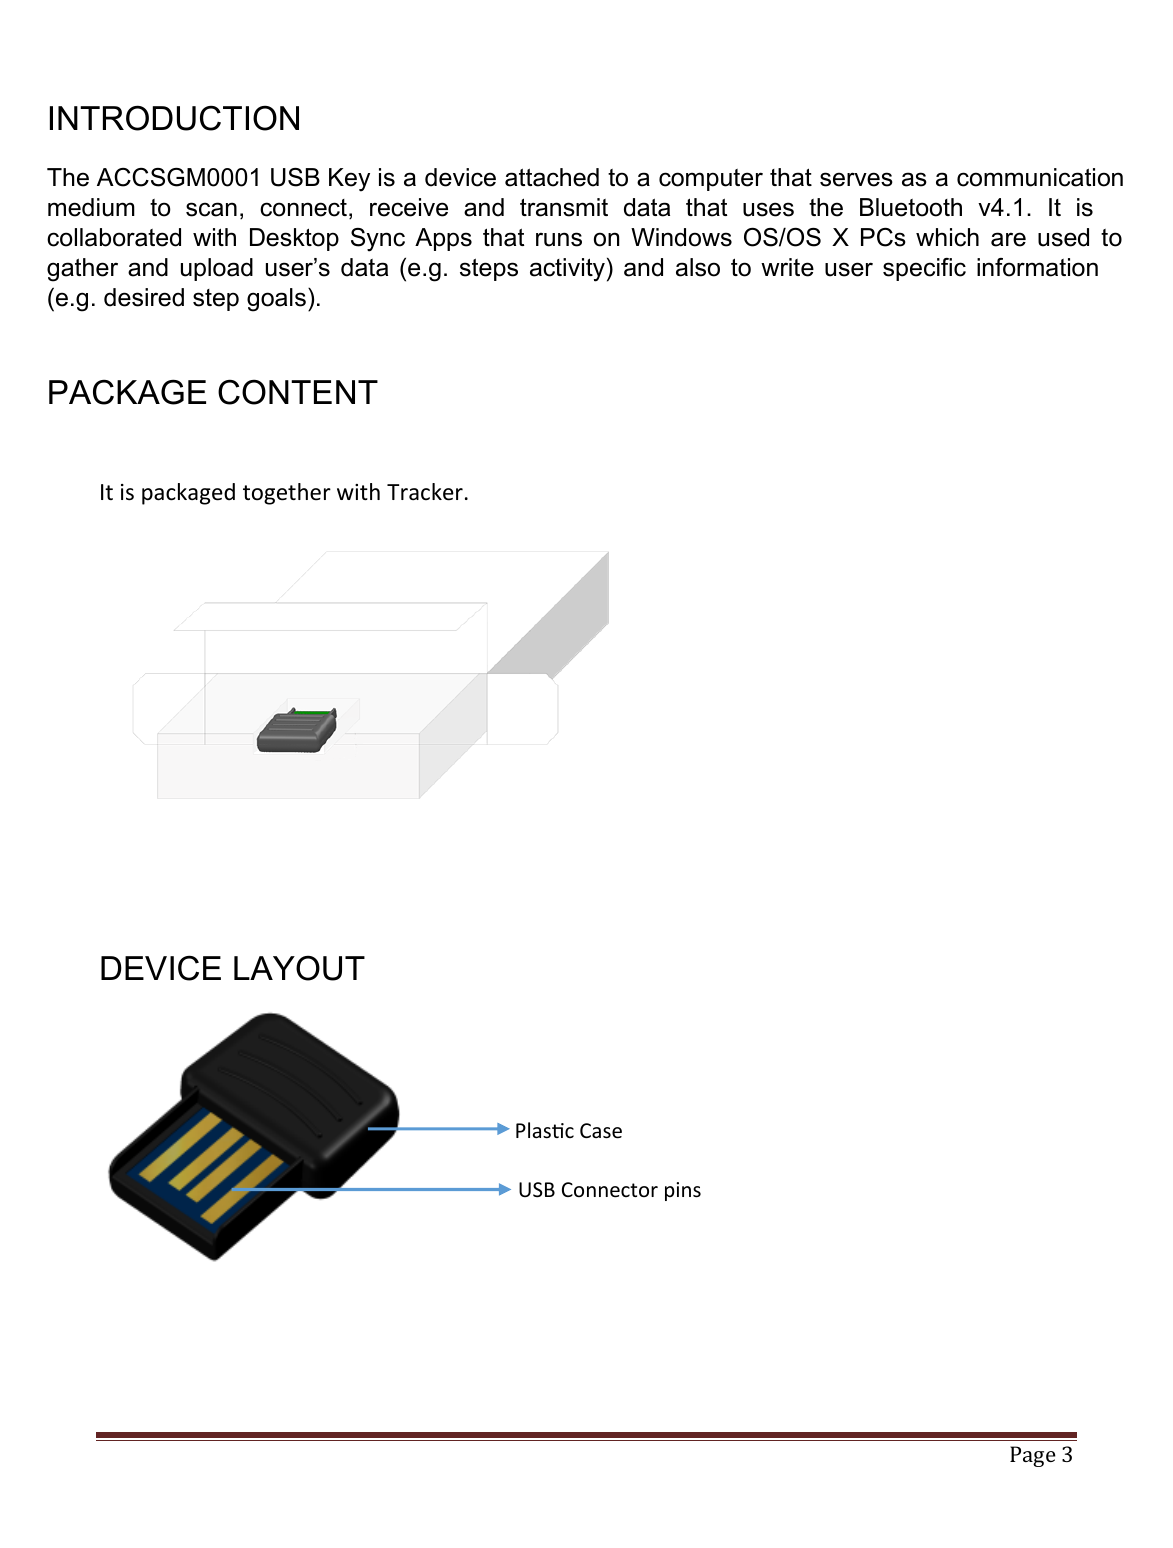   Page 3   INTRODUCTION  The ACCSGM0001 USB Key is a device attached to a computer that serves as a communicationmedium  to  scan,  connect,  receive  and  transmit  data  that  uses  the  Bluetooth  v4.1.  It  is collaborated  with  Desktop  Sync  Apps  that runs  on  Windows  OS/OS  X  PCs  which  are  used  togather  and  upload user’s data  (e.g.  steps  activity) and  also to  write  user  specific  information (e.g. desired step goals).    PACKAGE CONTENT  It is packaged together with Tracker.           DEVICE LAYOUT         Plasc Case USB Connector pins 